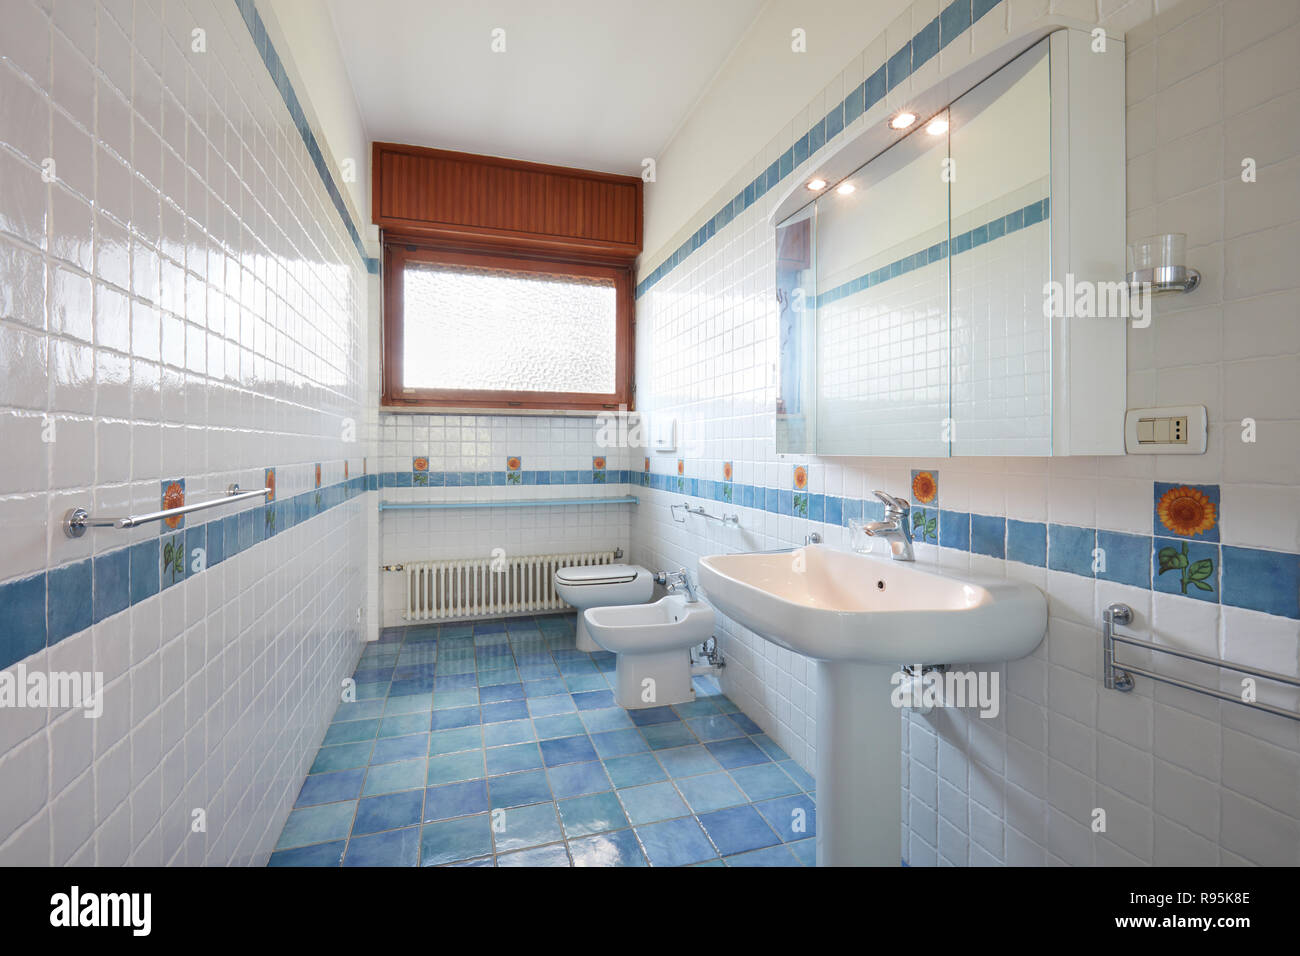 Normal bathroom with blue and white tiles in apartment interior Stock Photo